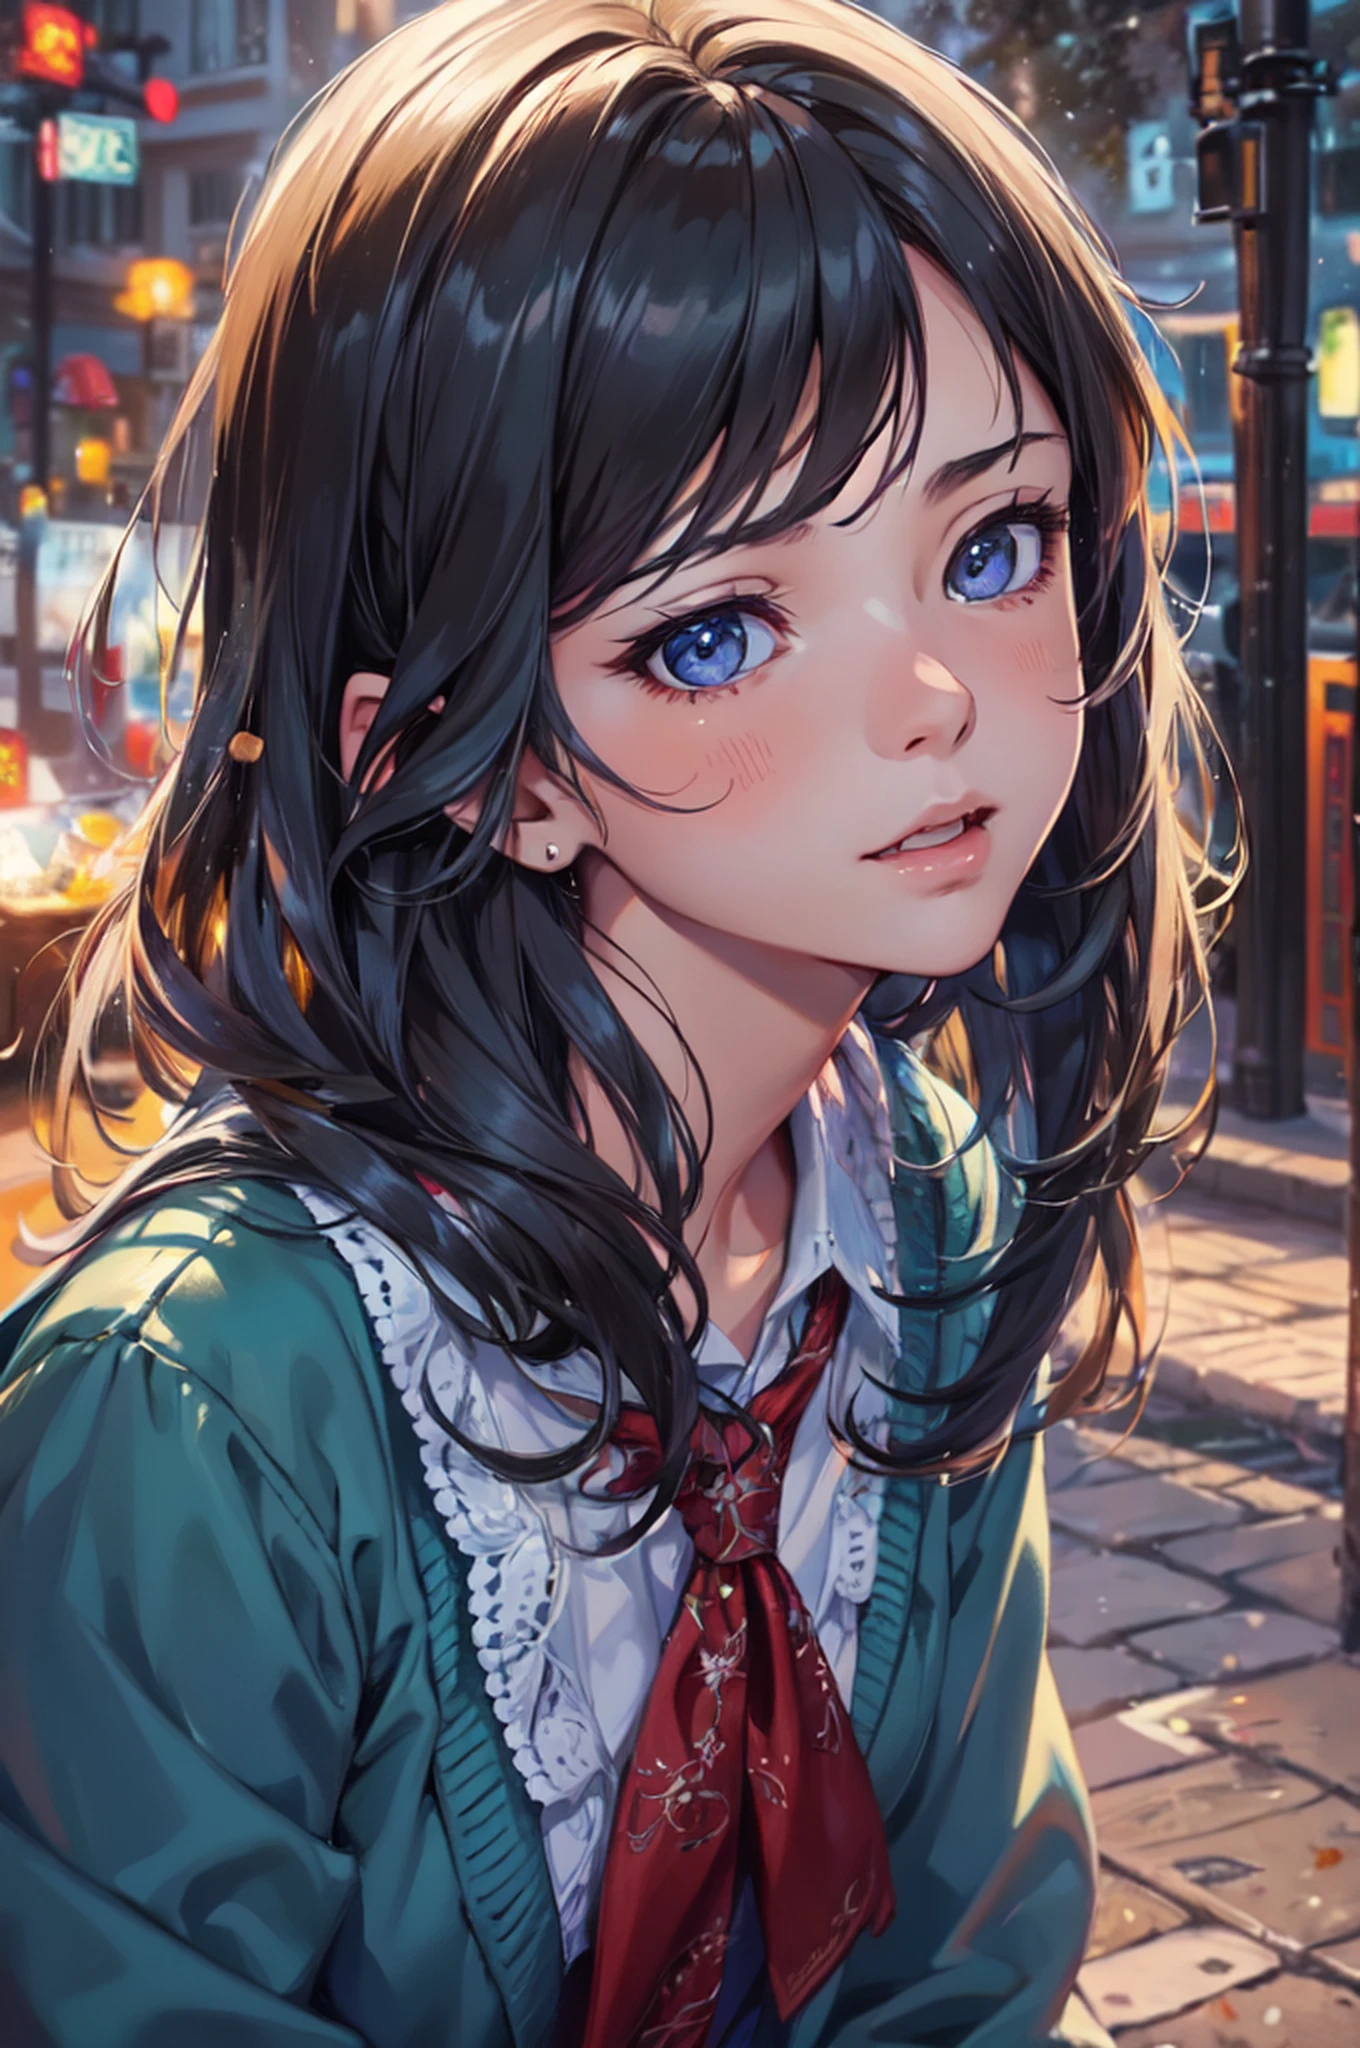 Unforgivable Secret Aise,school,(Best Quality, hight resolution, masutepiece:1.2), Ultra-detailed, Realistic:1.37, Accurate facial expressions, Detailed hair and clothes, Vibrant colors, Soft lighting, Bokeh, Oil Painting, emotional, Thought-provoking, artistic composition,